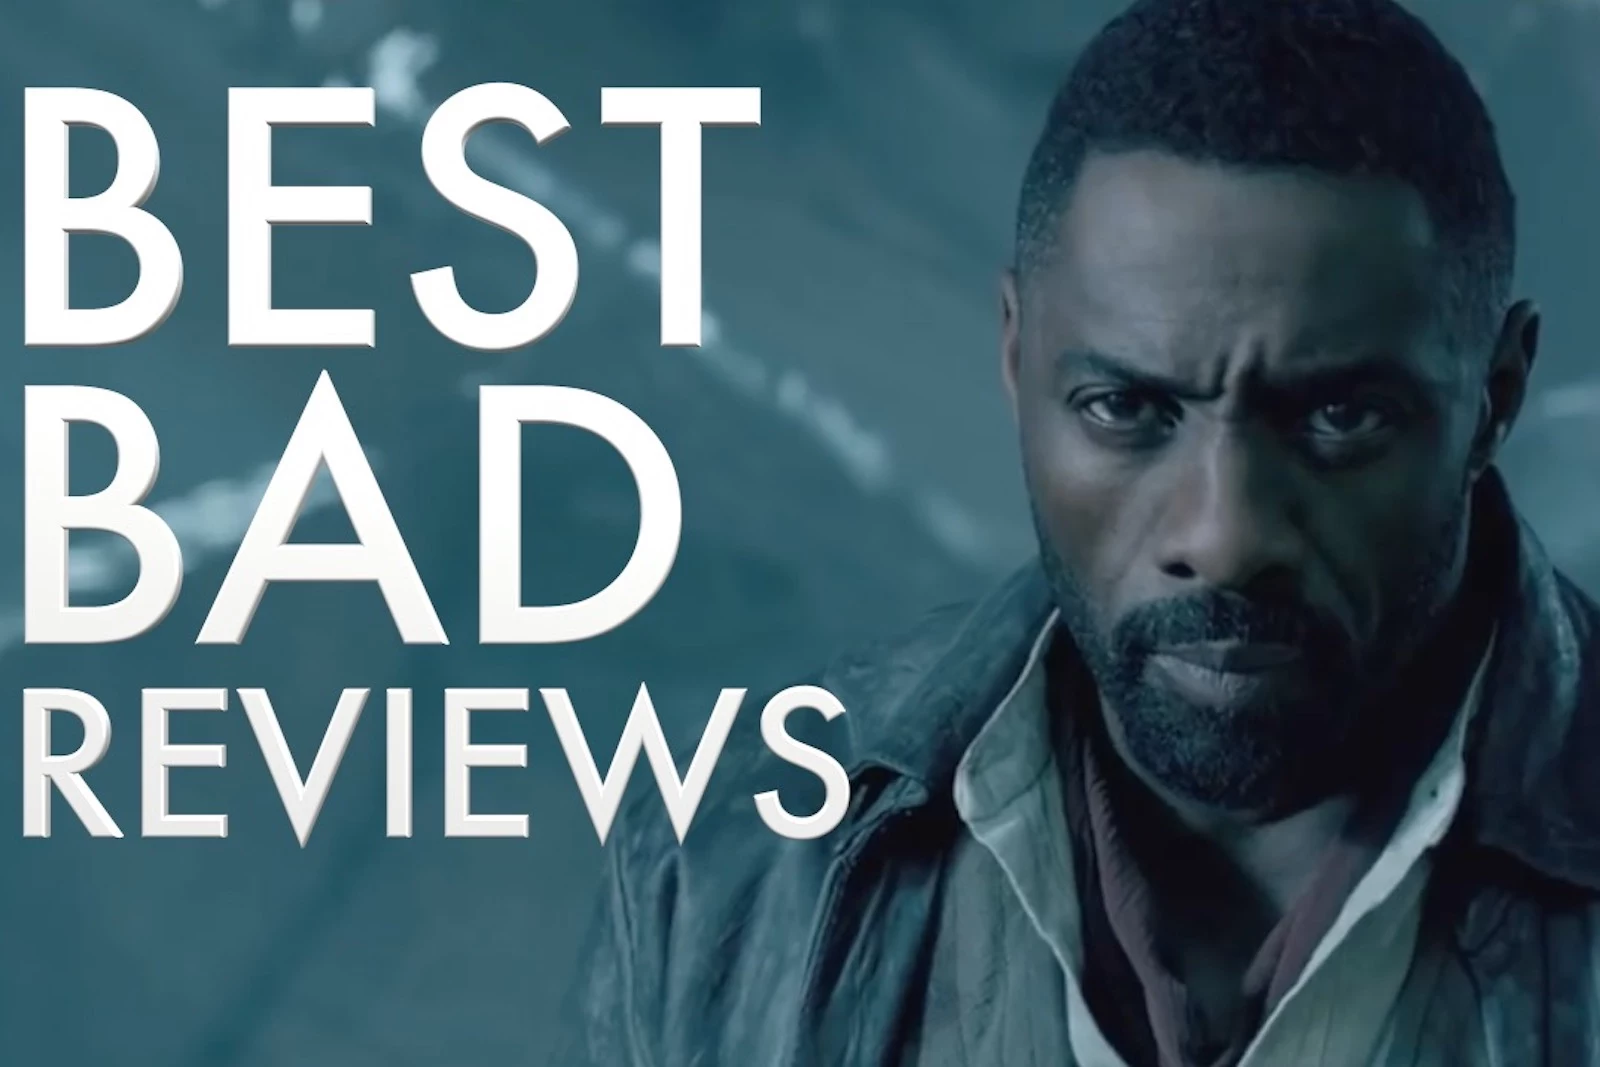 The Dark Tower download the new